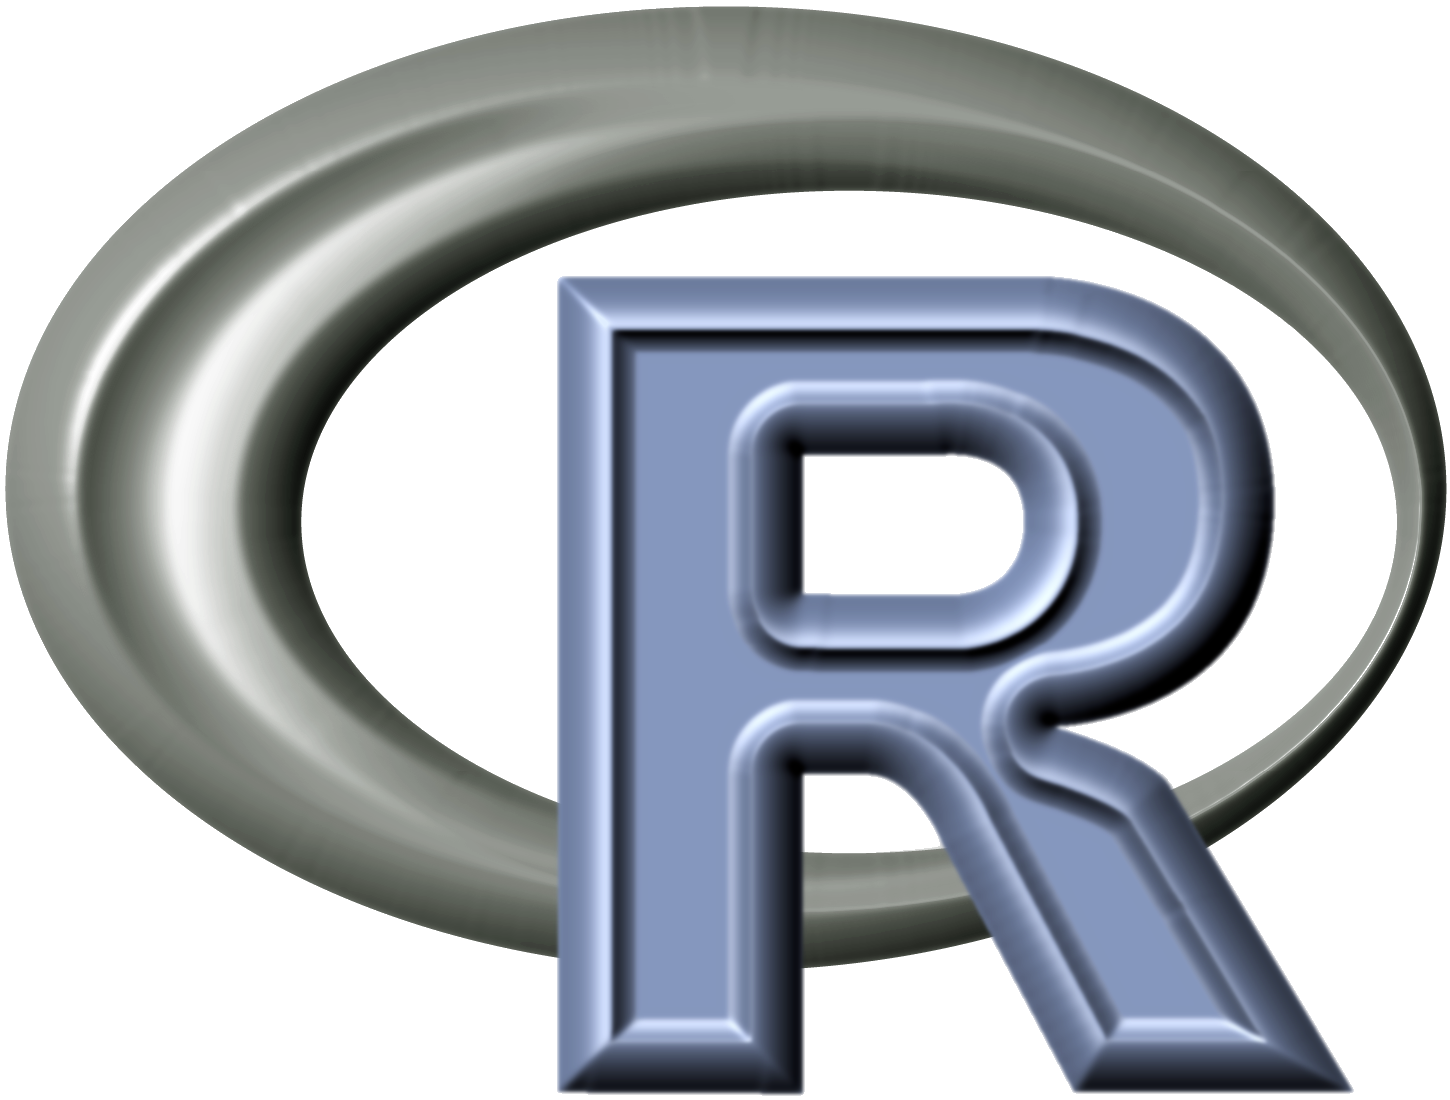 Introduction To R And Rstudio